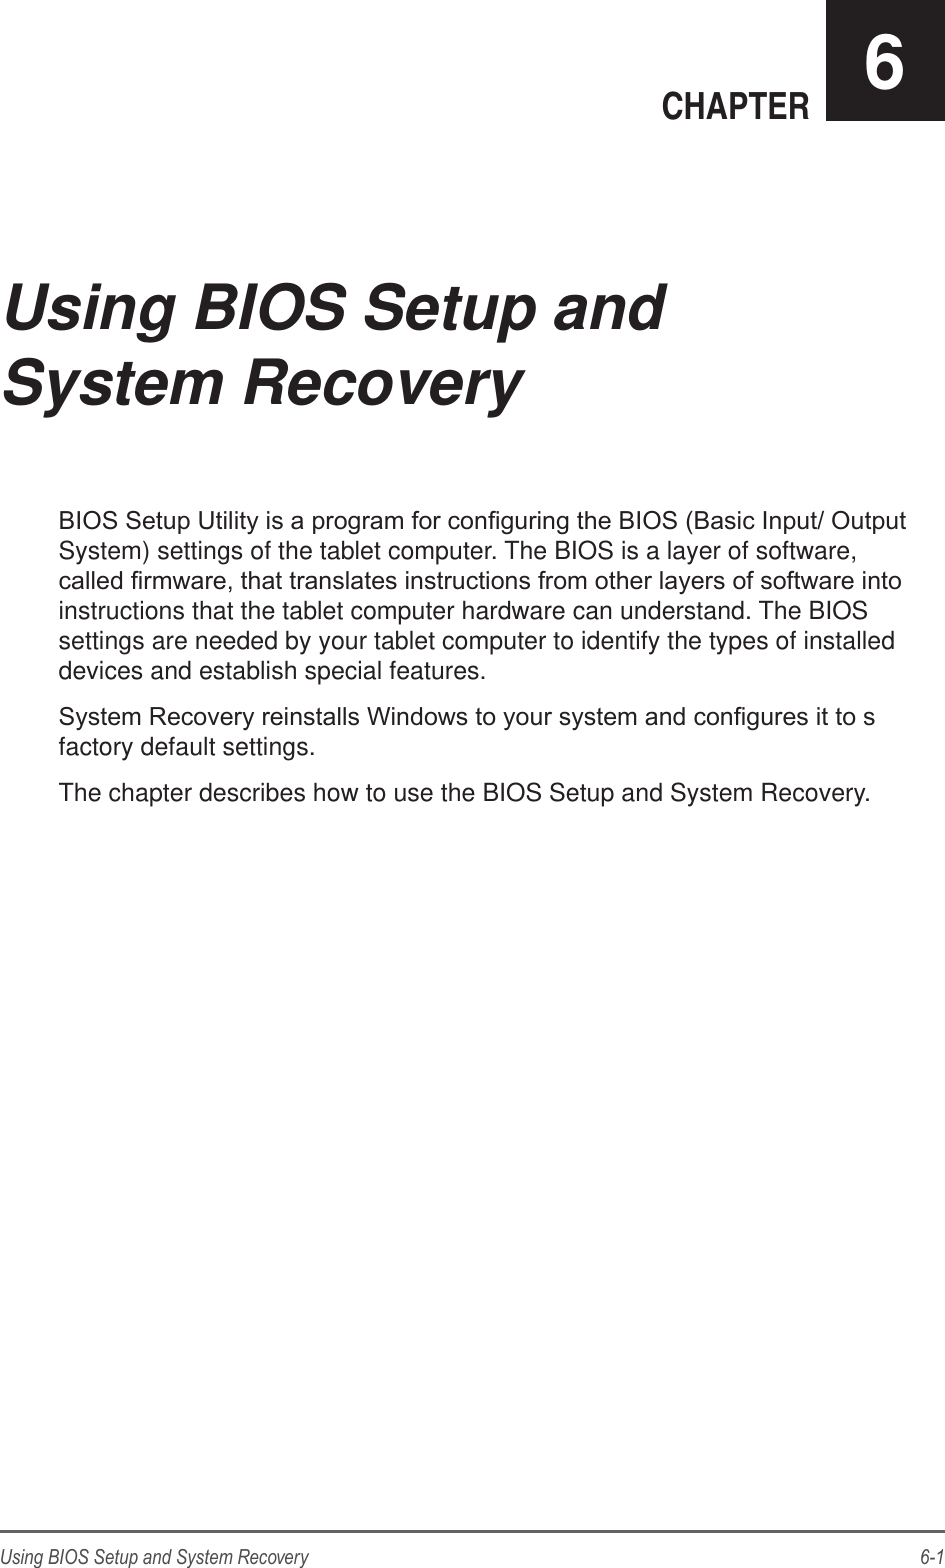 6-1Using BIOS Setup and System RecoveryCHAPTER 6BIOS Setup Utility is a program for conguring the BIOS (Basic Input/ Output System) settings of the tablet computer. The BIOS is a layer of software, called rmware, that translates instructions from other layers of software into instructions that the tablet computer hardware can understand. The BIOS settings are needed by your tablet computer to identify the types of installed devices and establish special features.System Recovery reinstalls Windows to your system and congures it to s factory default settings.The chapter describes how to use the BIOS Setup and System Recovery.Using BIOS Setup and System Recovery